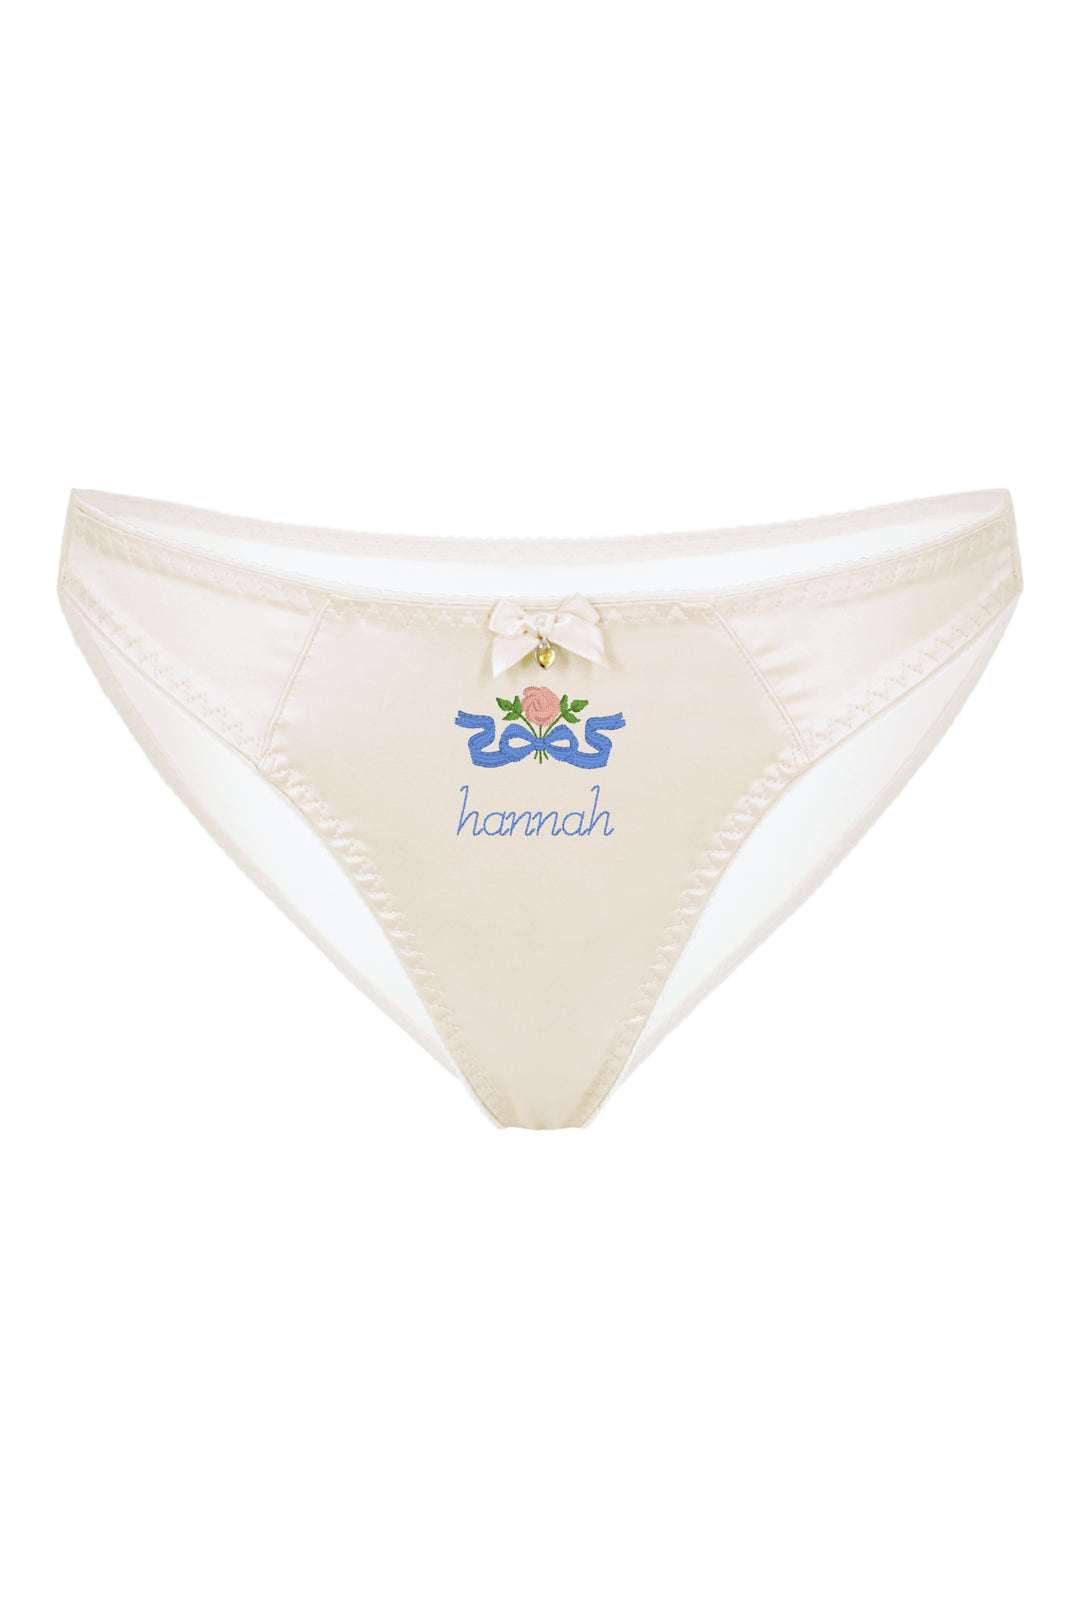 English Rose: Personalised Knickers